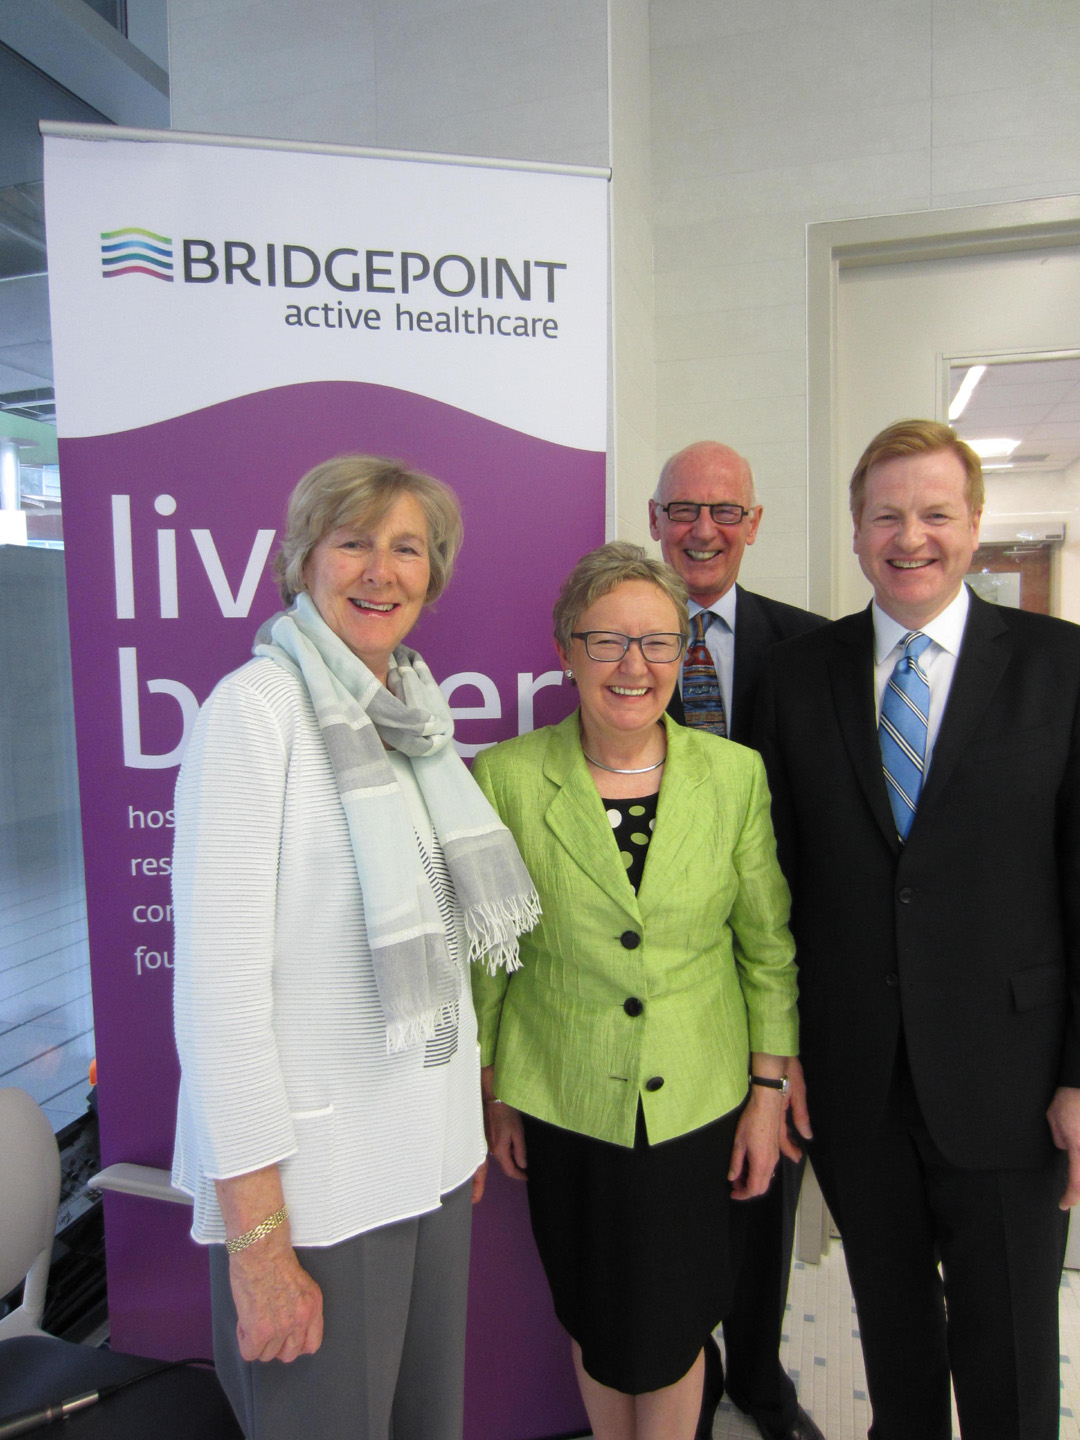 Tim and Frances Price at Bridgepoint